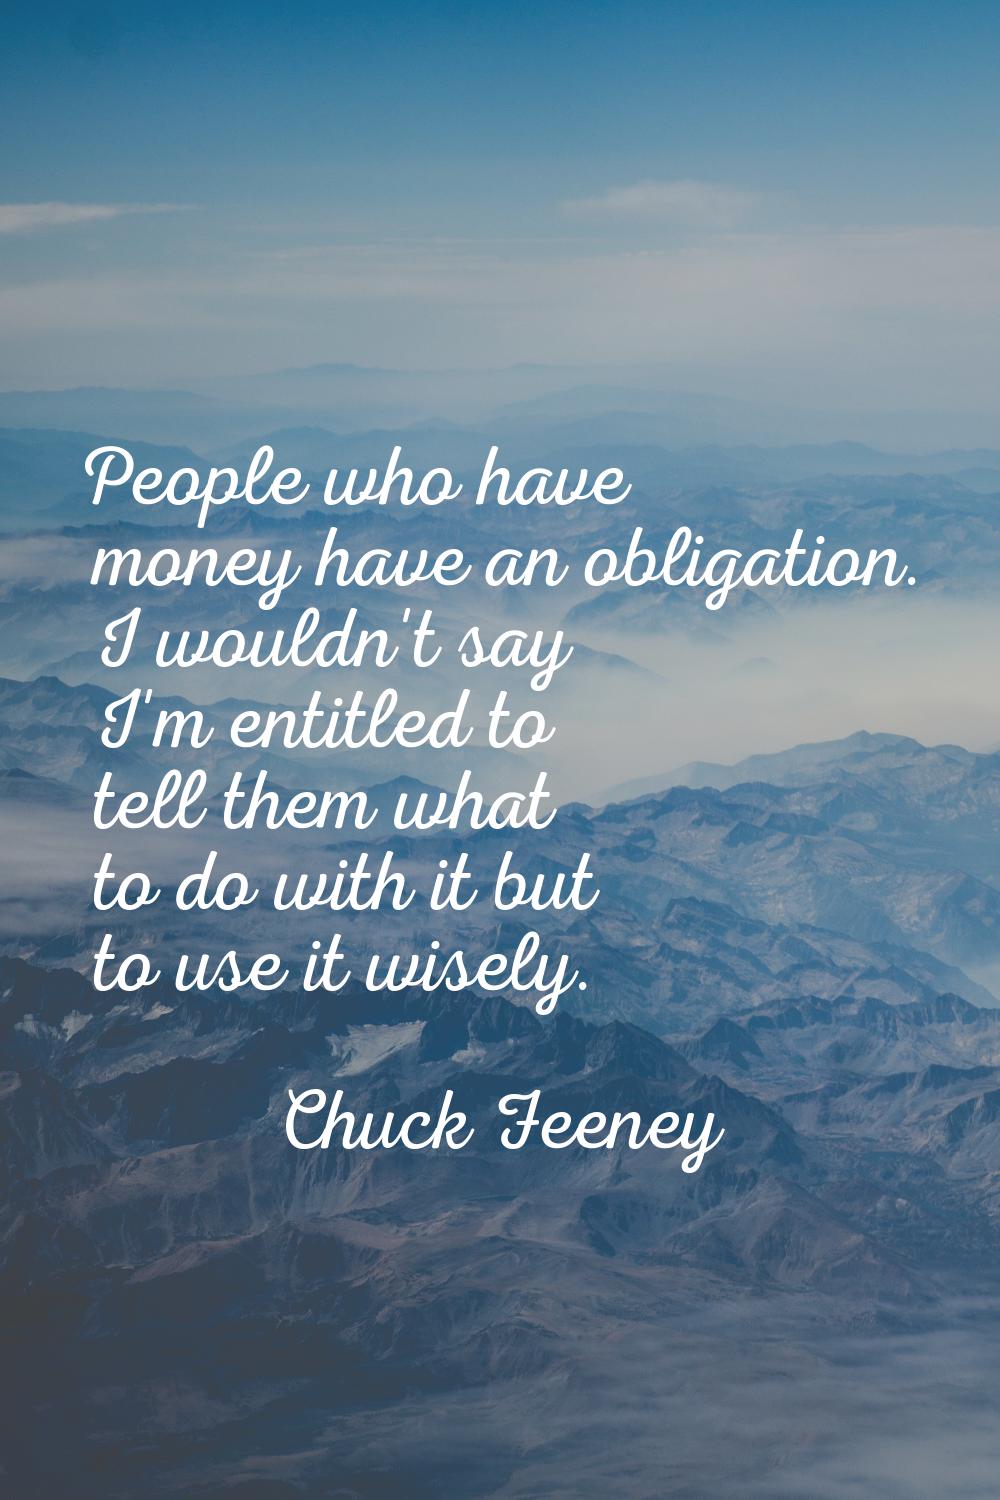 People who have money have an obligation. I wouldn't say I'm entitled to tell them what to do with 